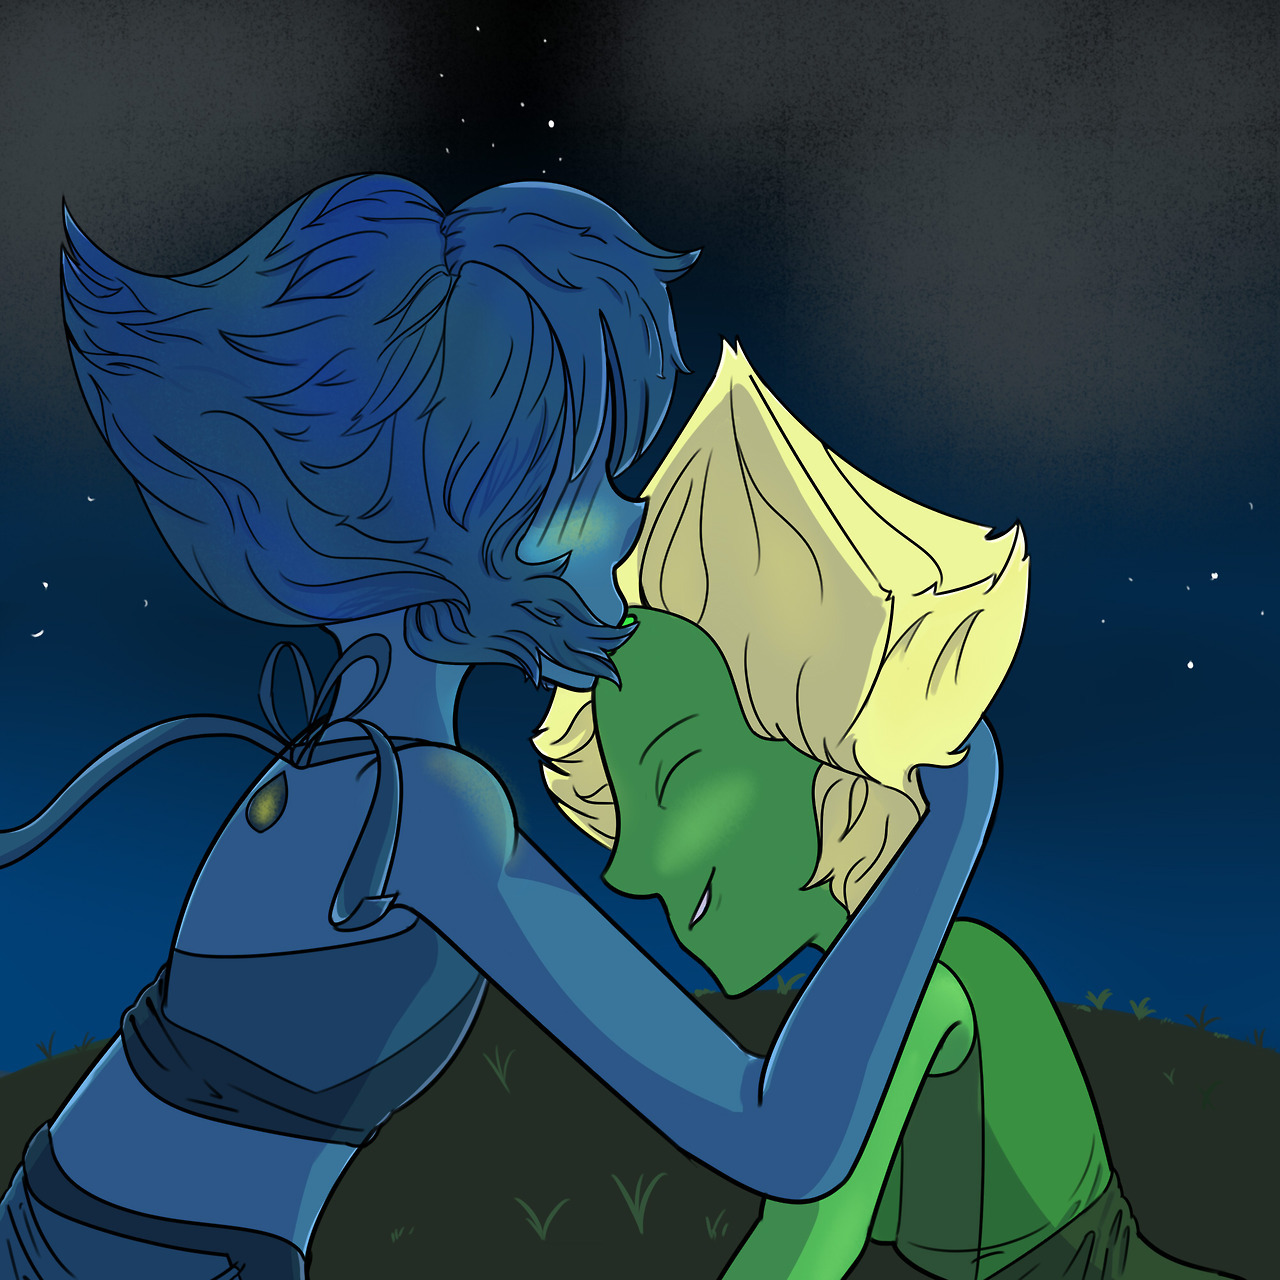 A soft kiss on a hill. If you like this please like and reblog I gave it my all for drawing and coloring them :)